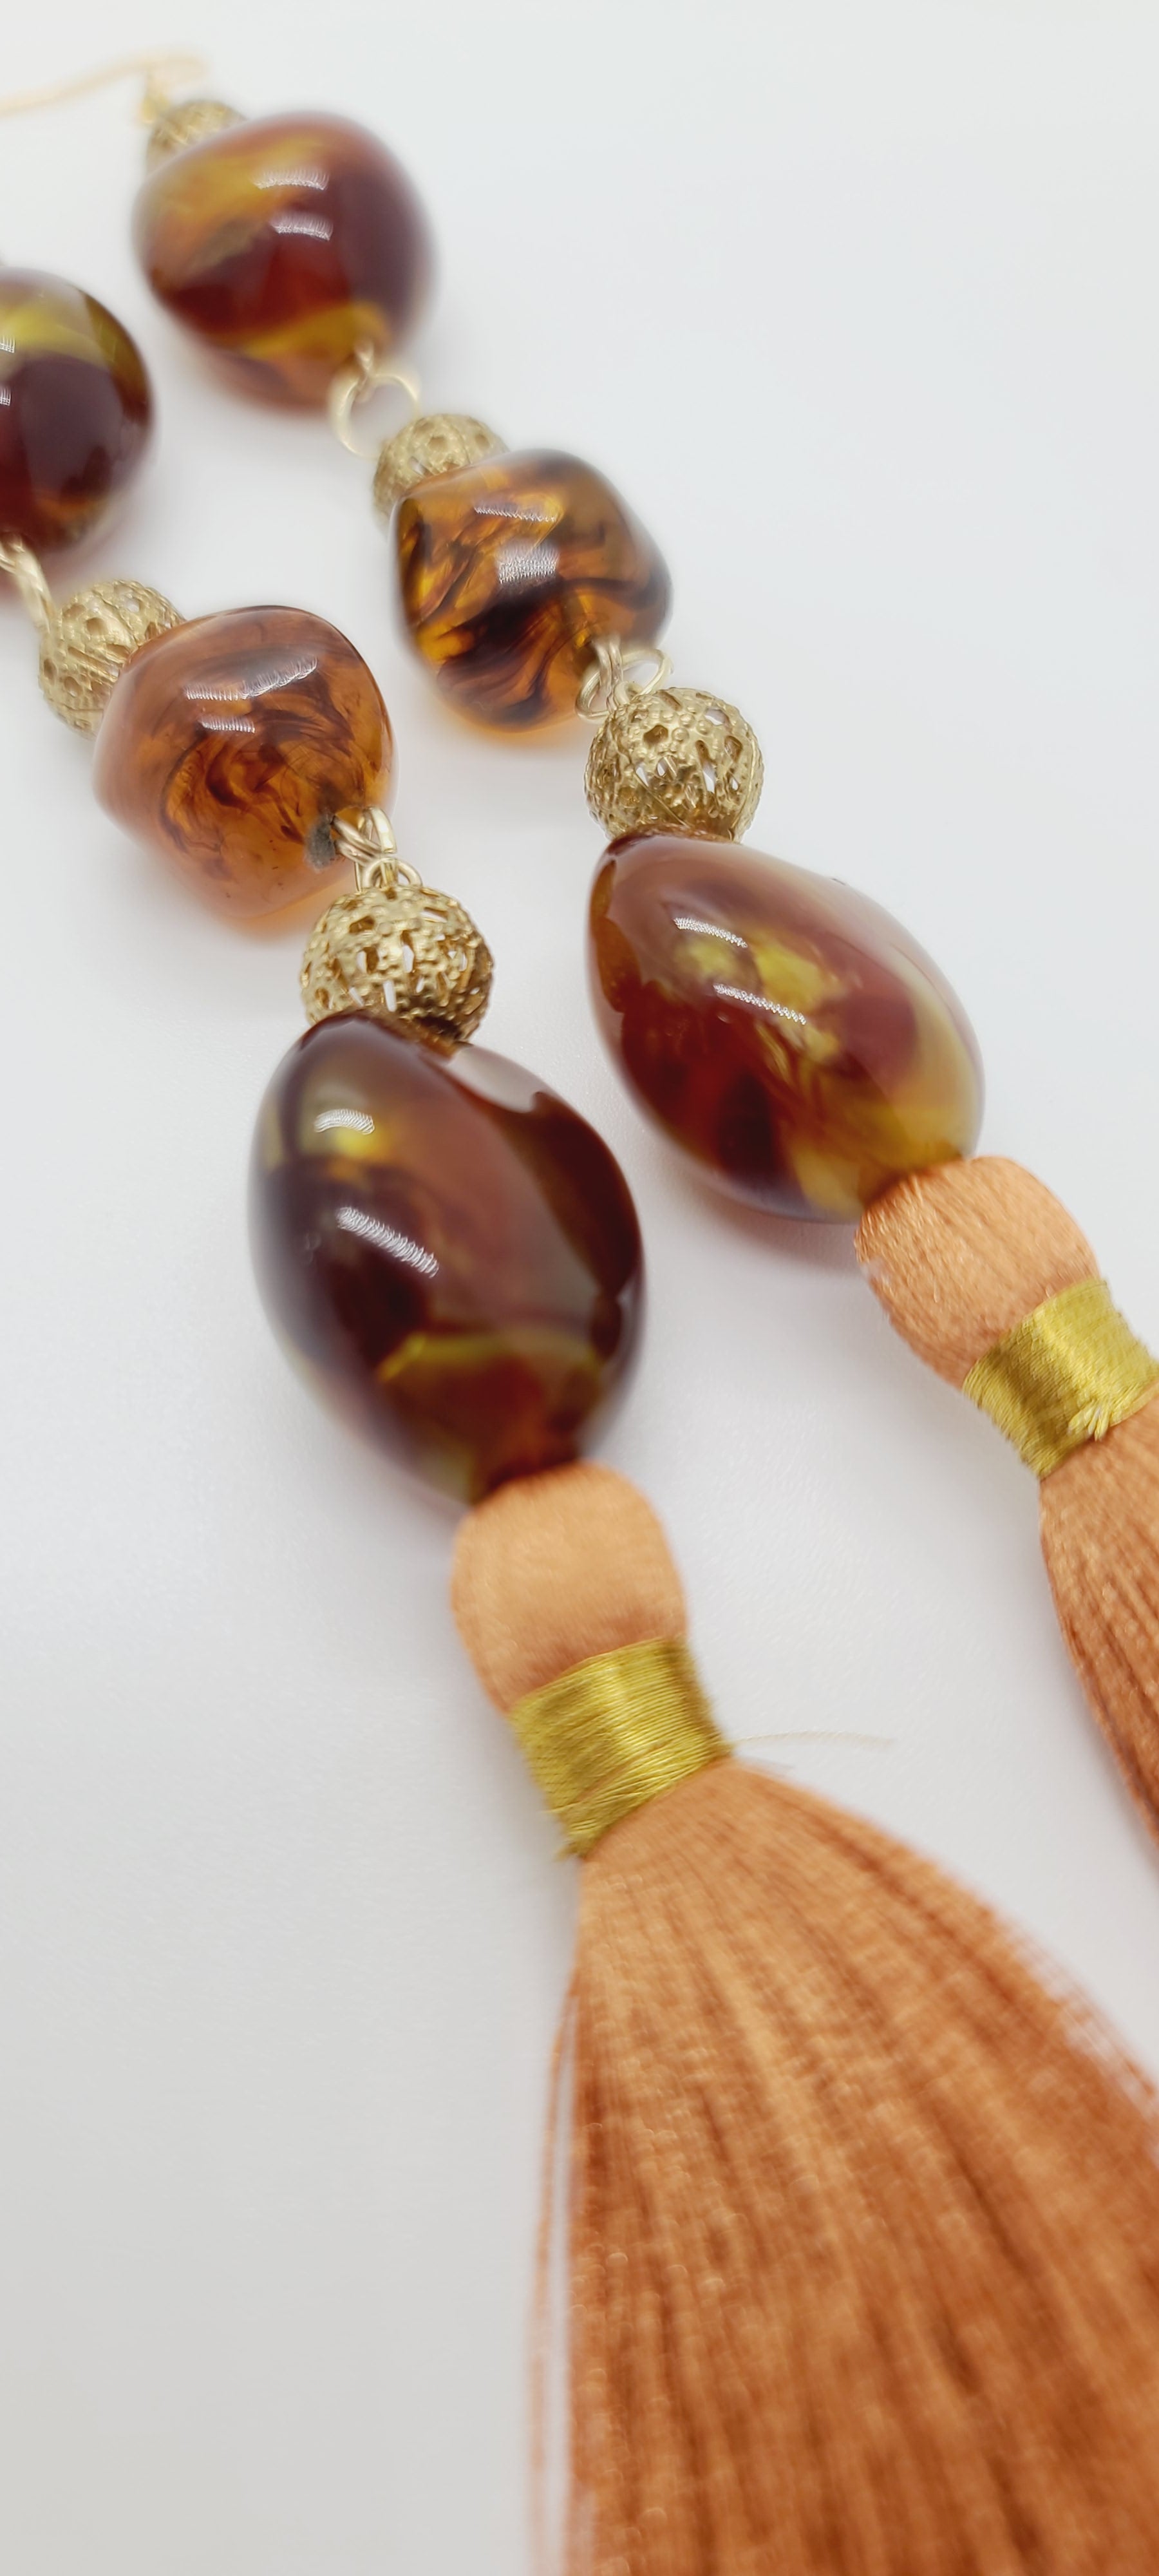 Length: 8.5 inches | Weight: 1.3 ounces  Distinctly You! These earrings are made with orange tassels, amber Multi swirl resin beads, 8mm gold filigree metal bead accents.